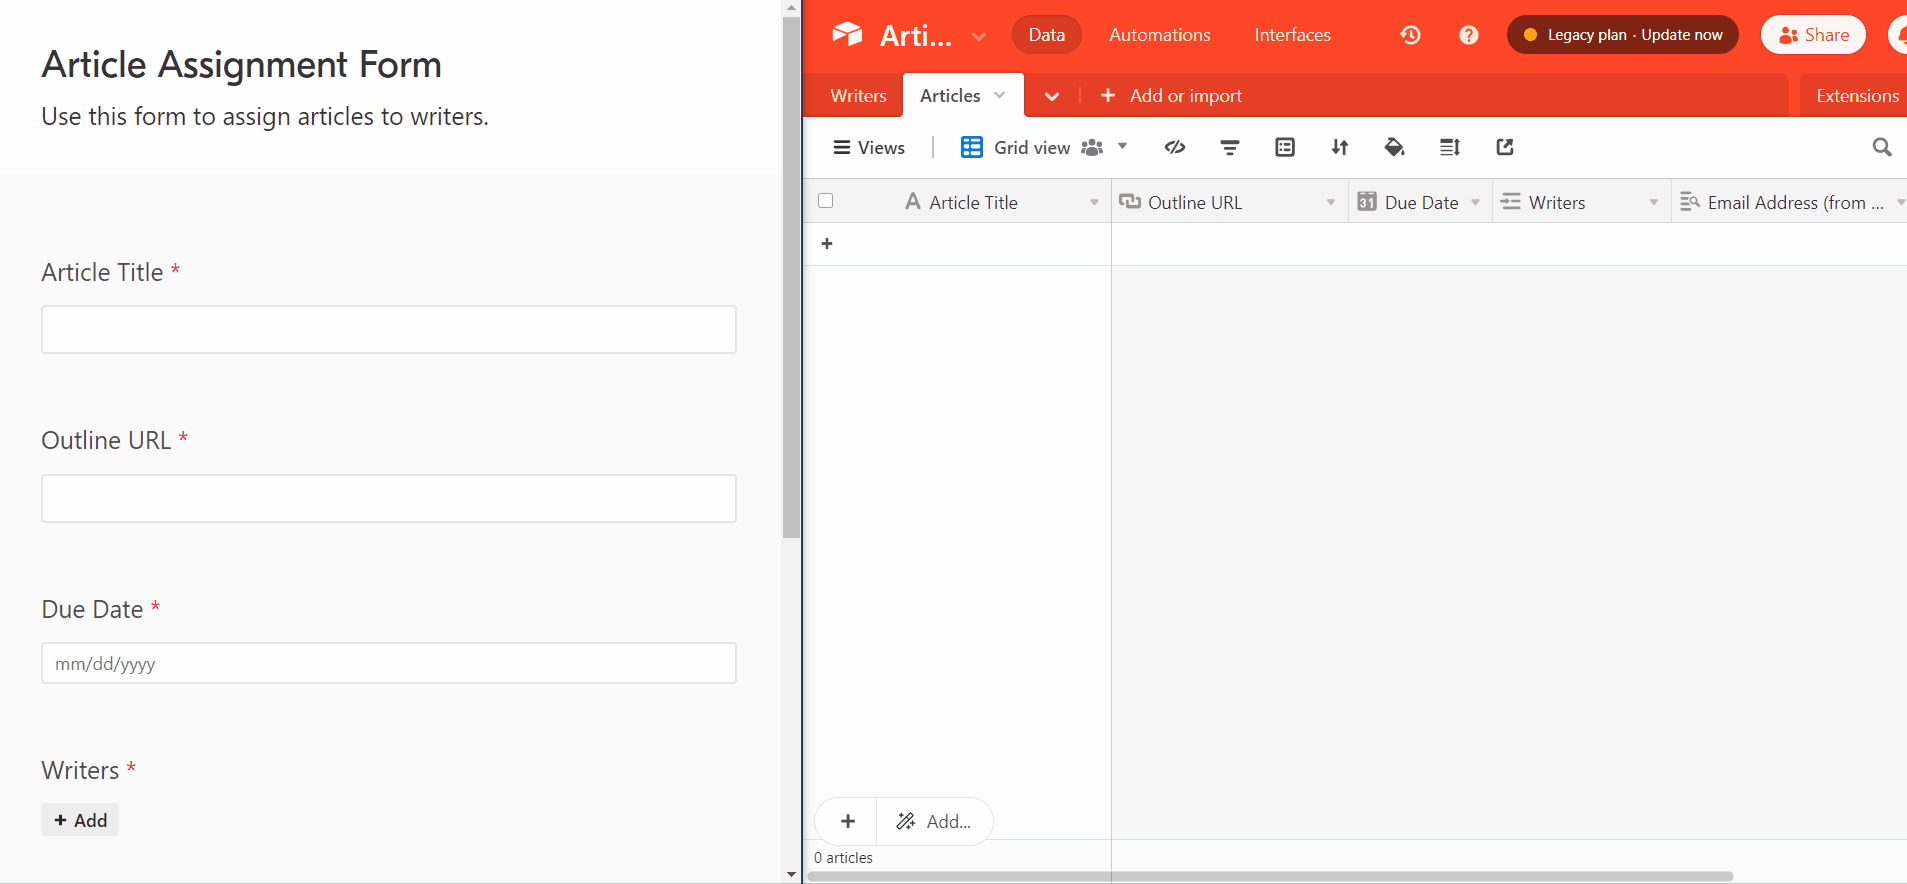 Demo of how Airtable automatically records new article assignments when the article assignment form is filled out